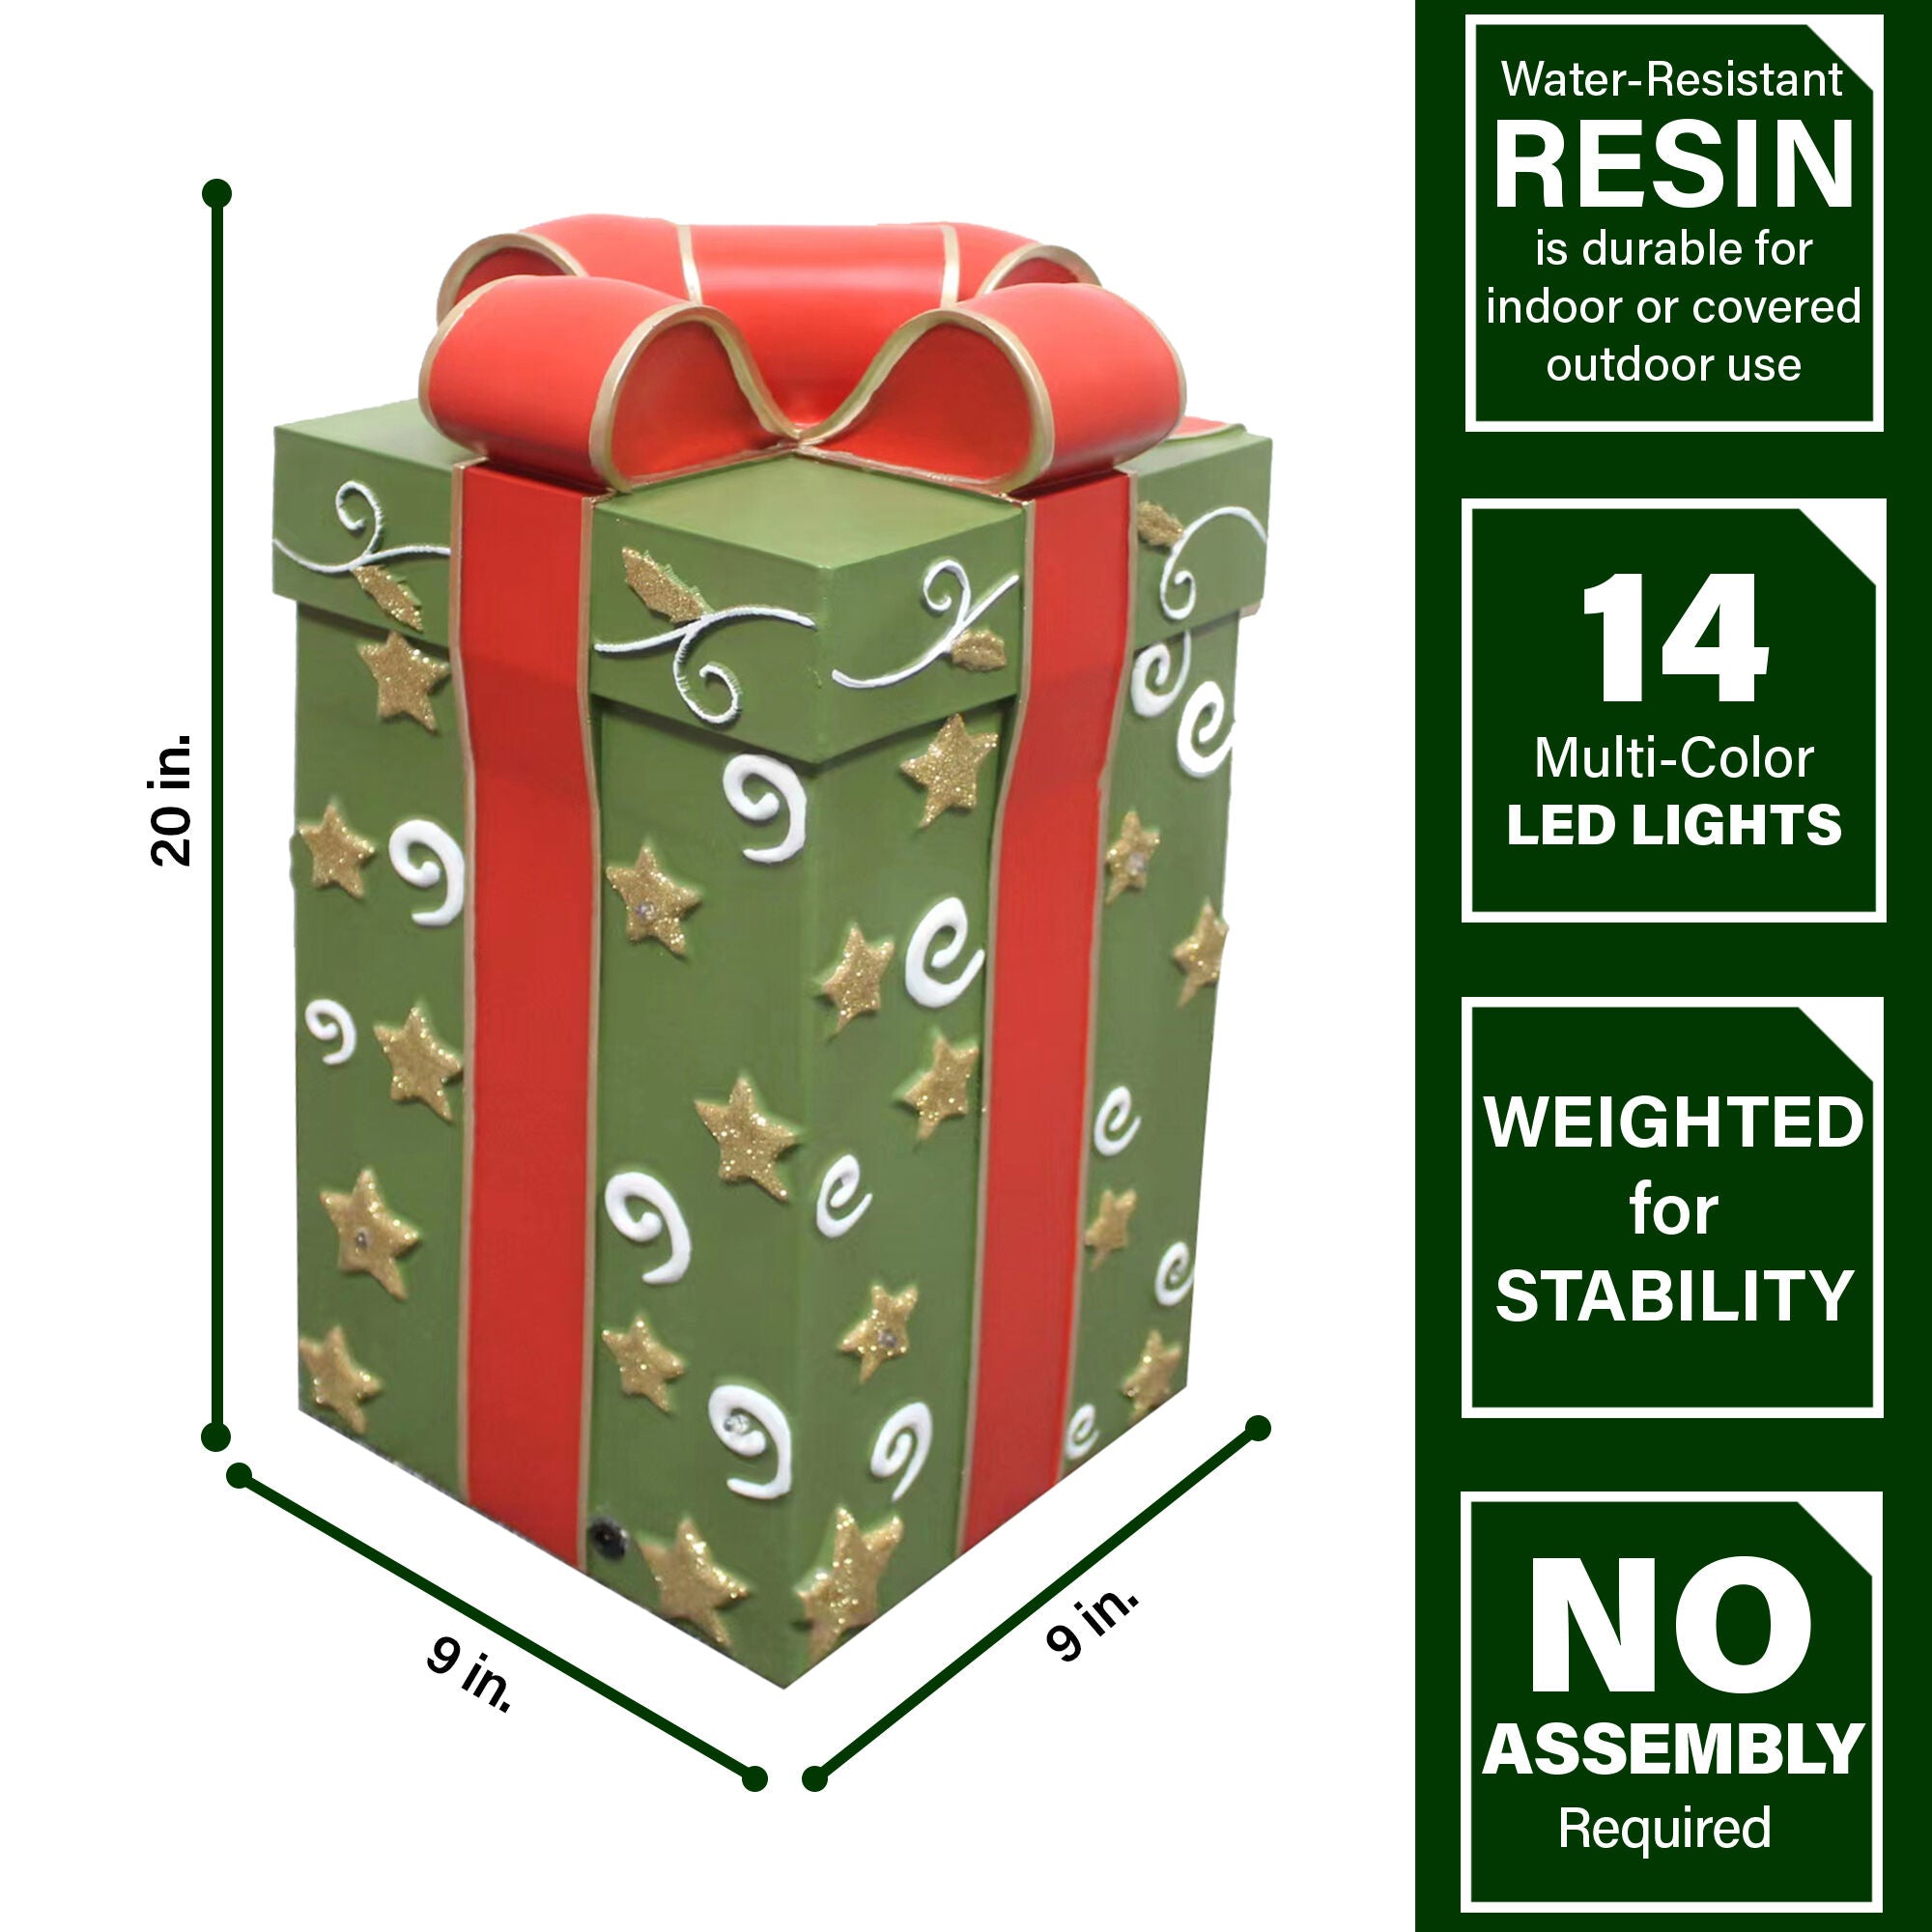 Fraser Hill Farm -  20-In. Green Square Gift Box with Red Bow and LED Lights, Festive Indoor Christmas Holiday Decorations, Plug-In